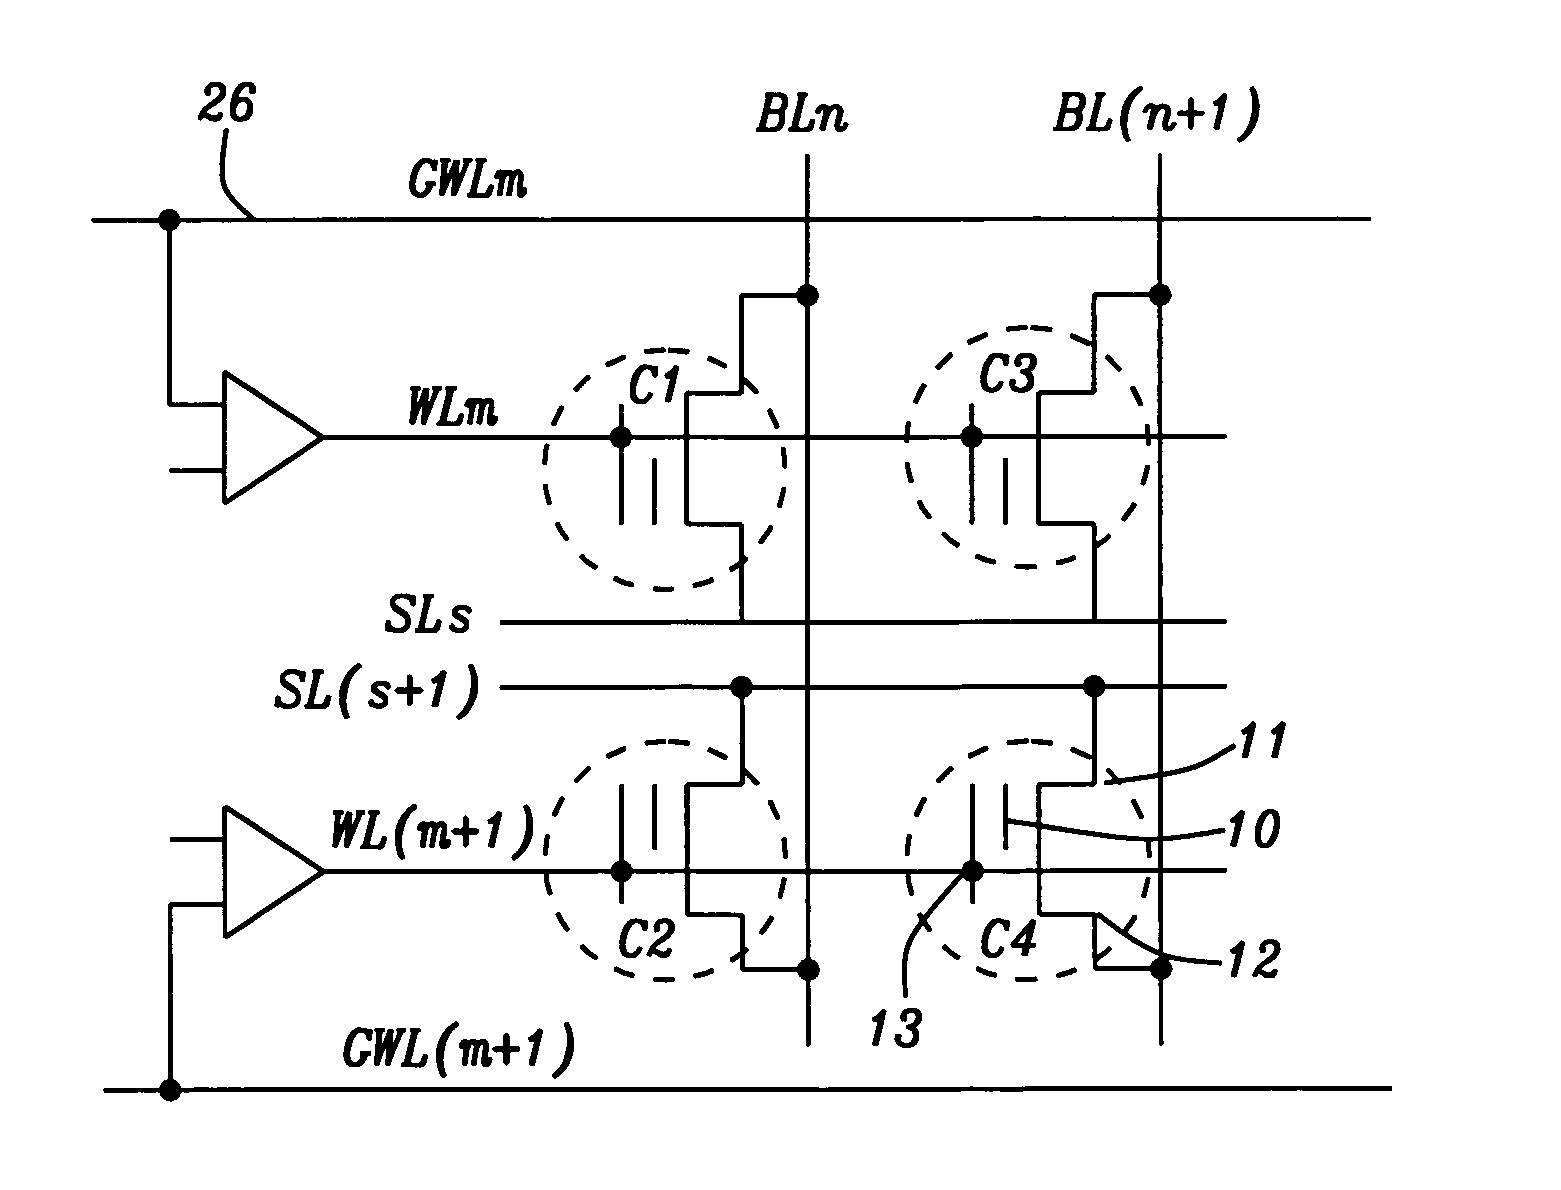 Array structure of two-transistor cells with merged floating gates for byte erase and re-write if disturbed algorithm